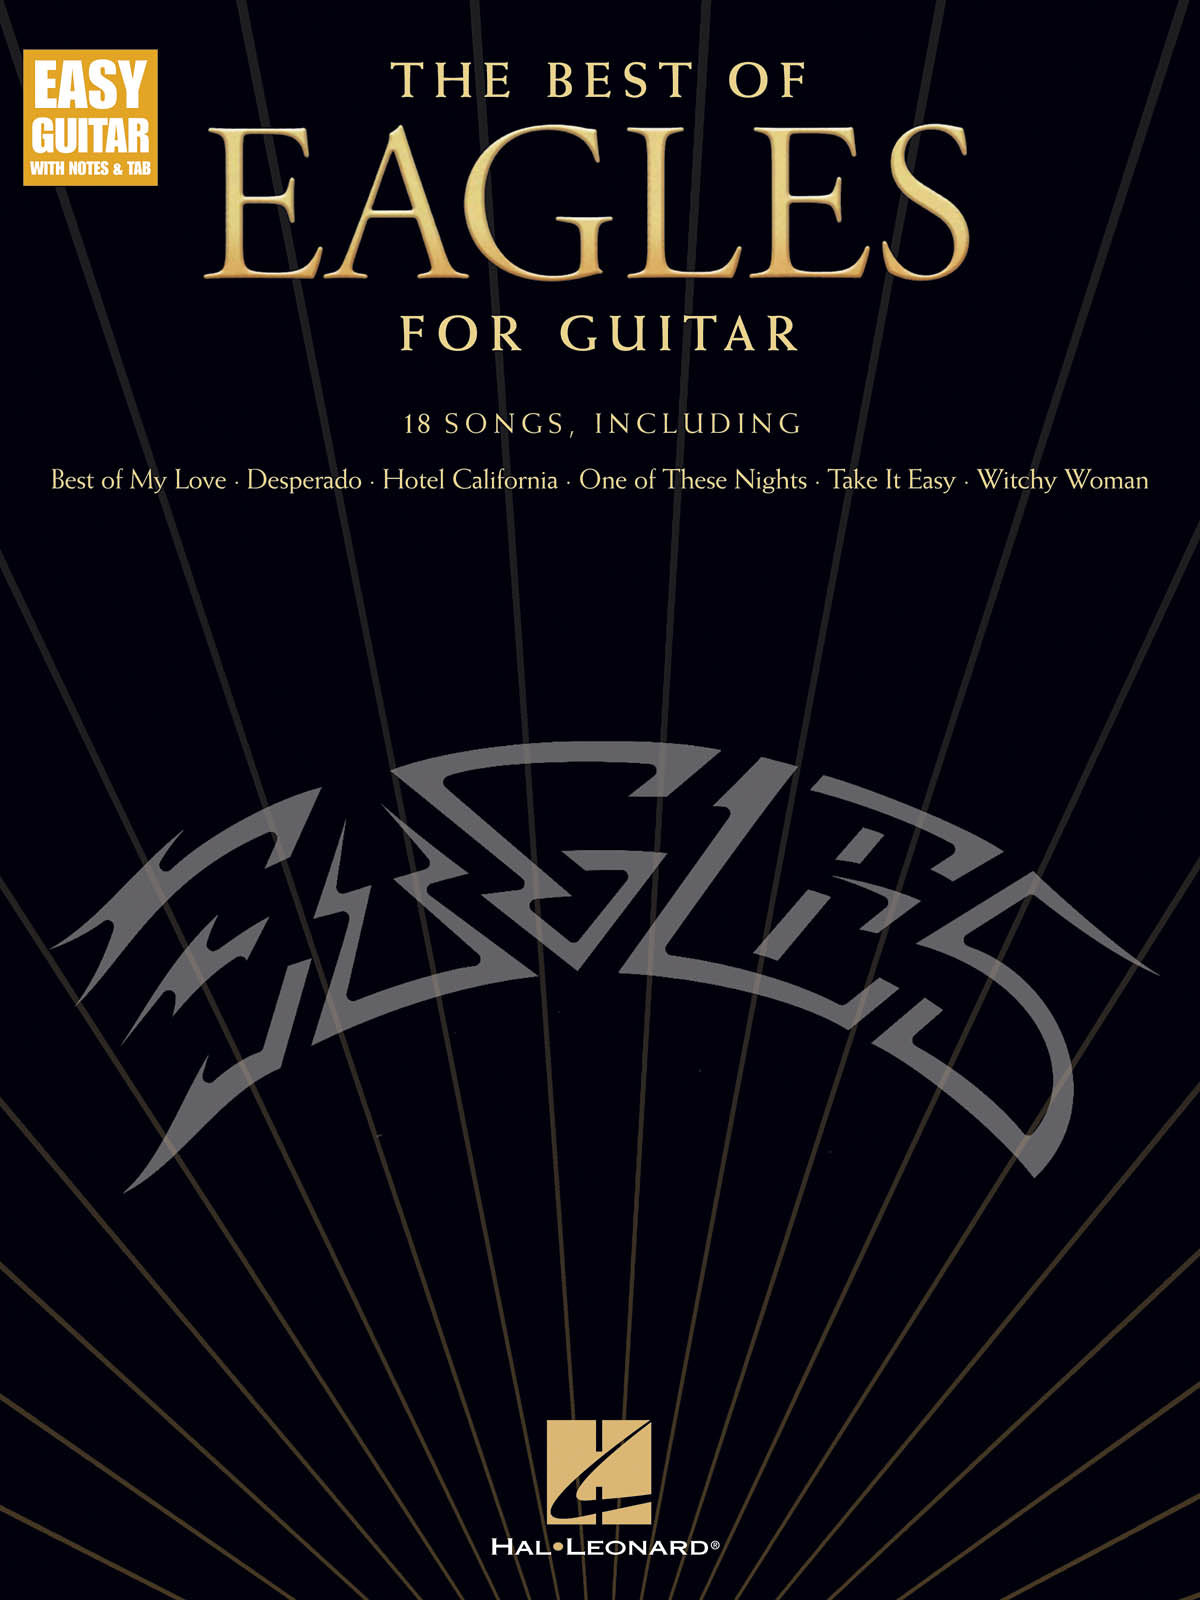 Image 1 of The Best of Eagles for Guitar – Updated Edition - SKU# 49-278630 : Product Type Media : Elderly Instruments